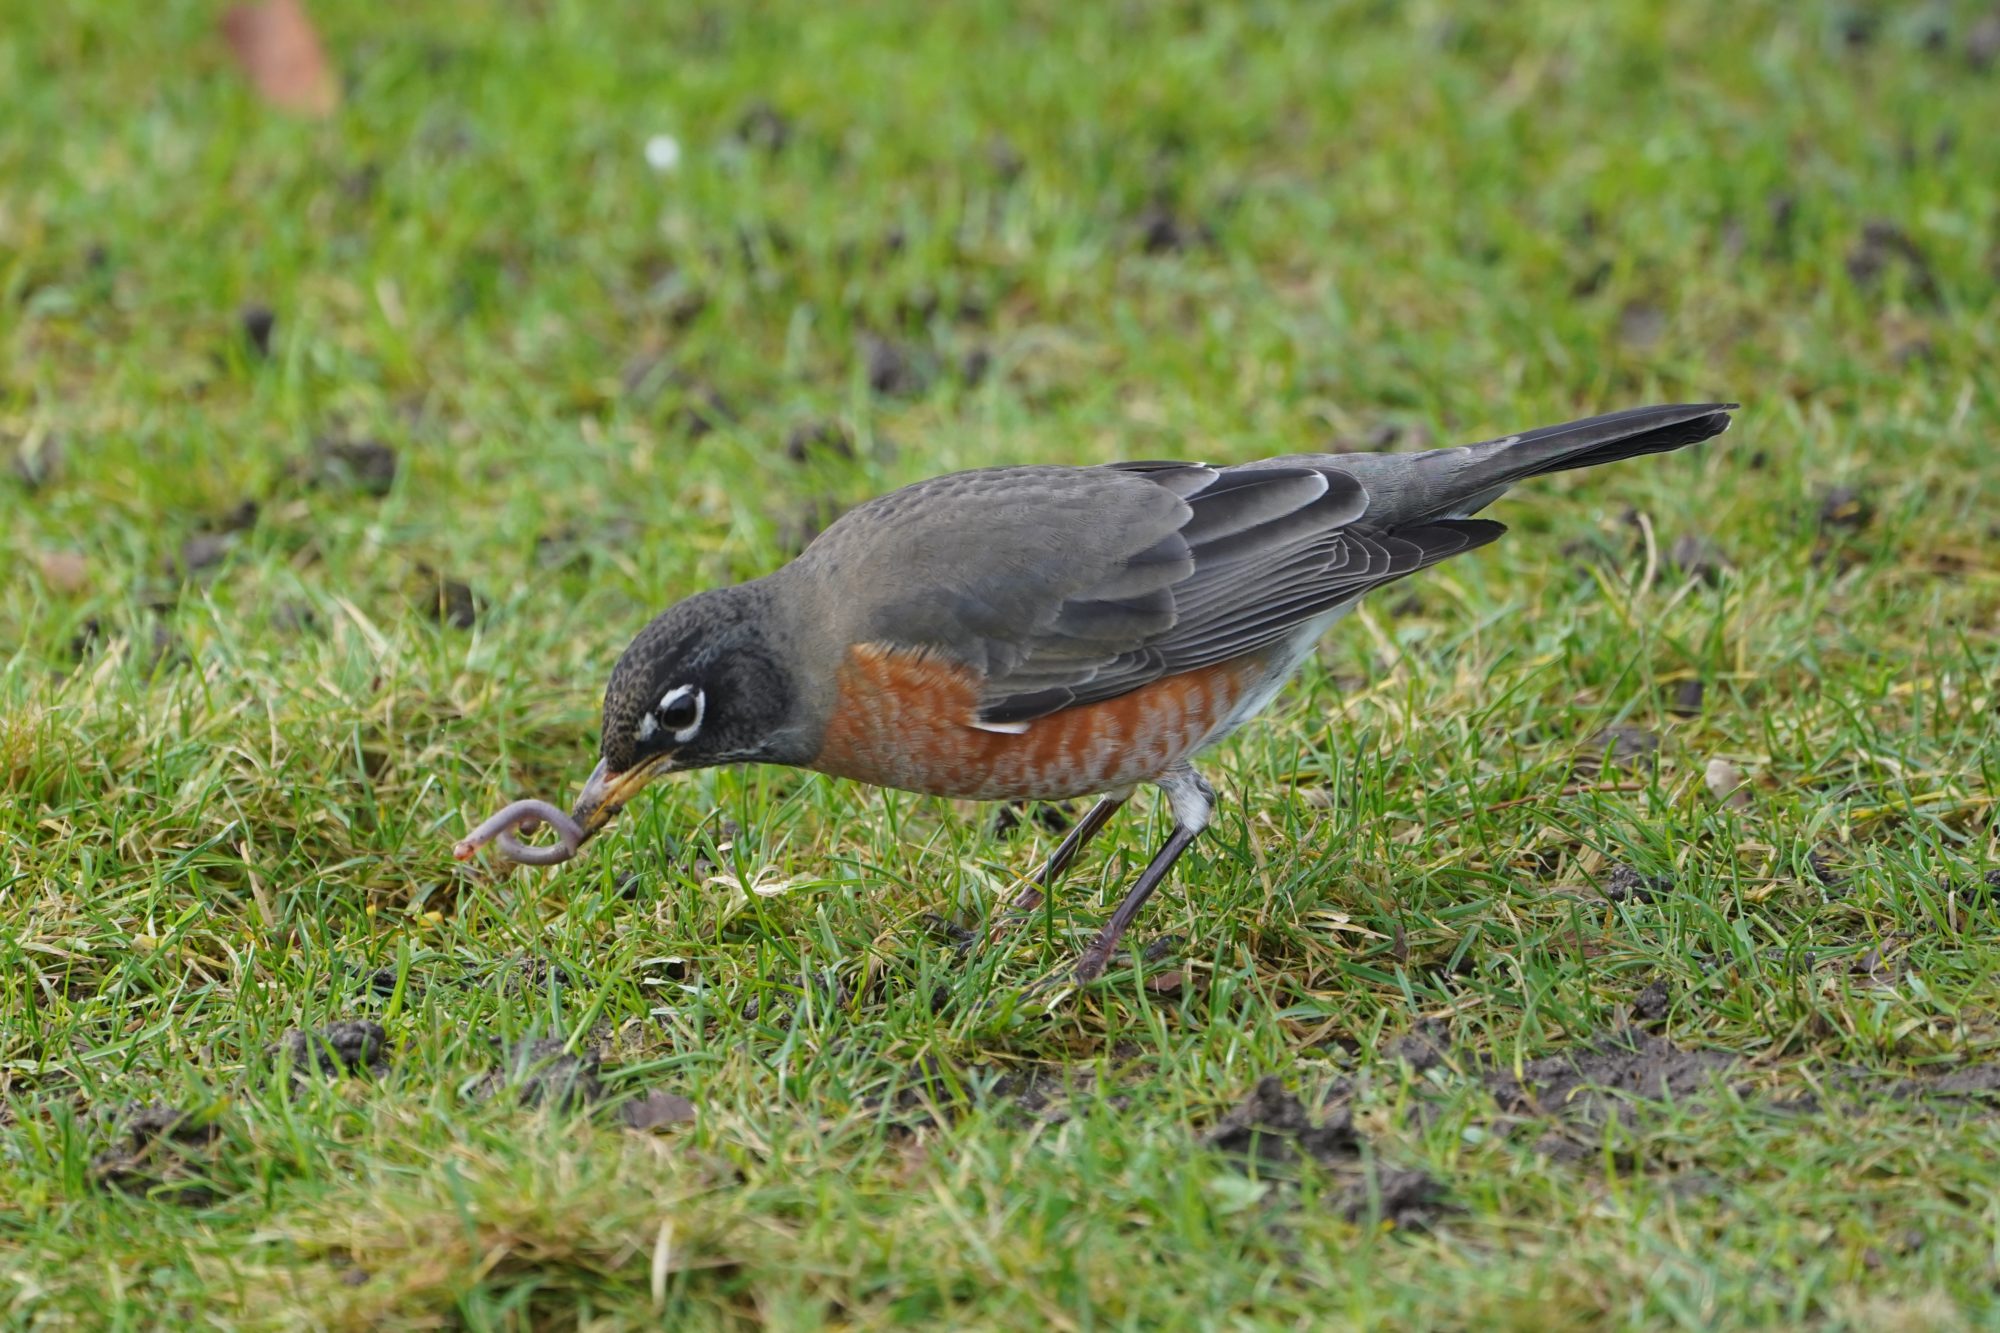 Robin pulling out a worm